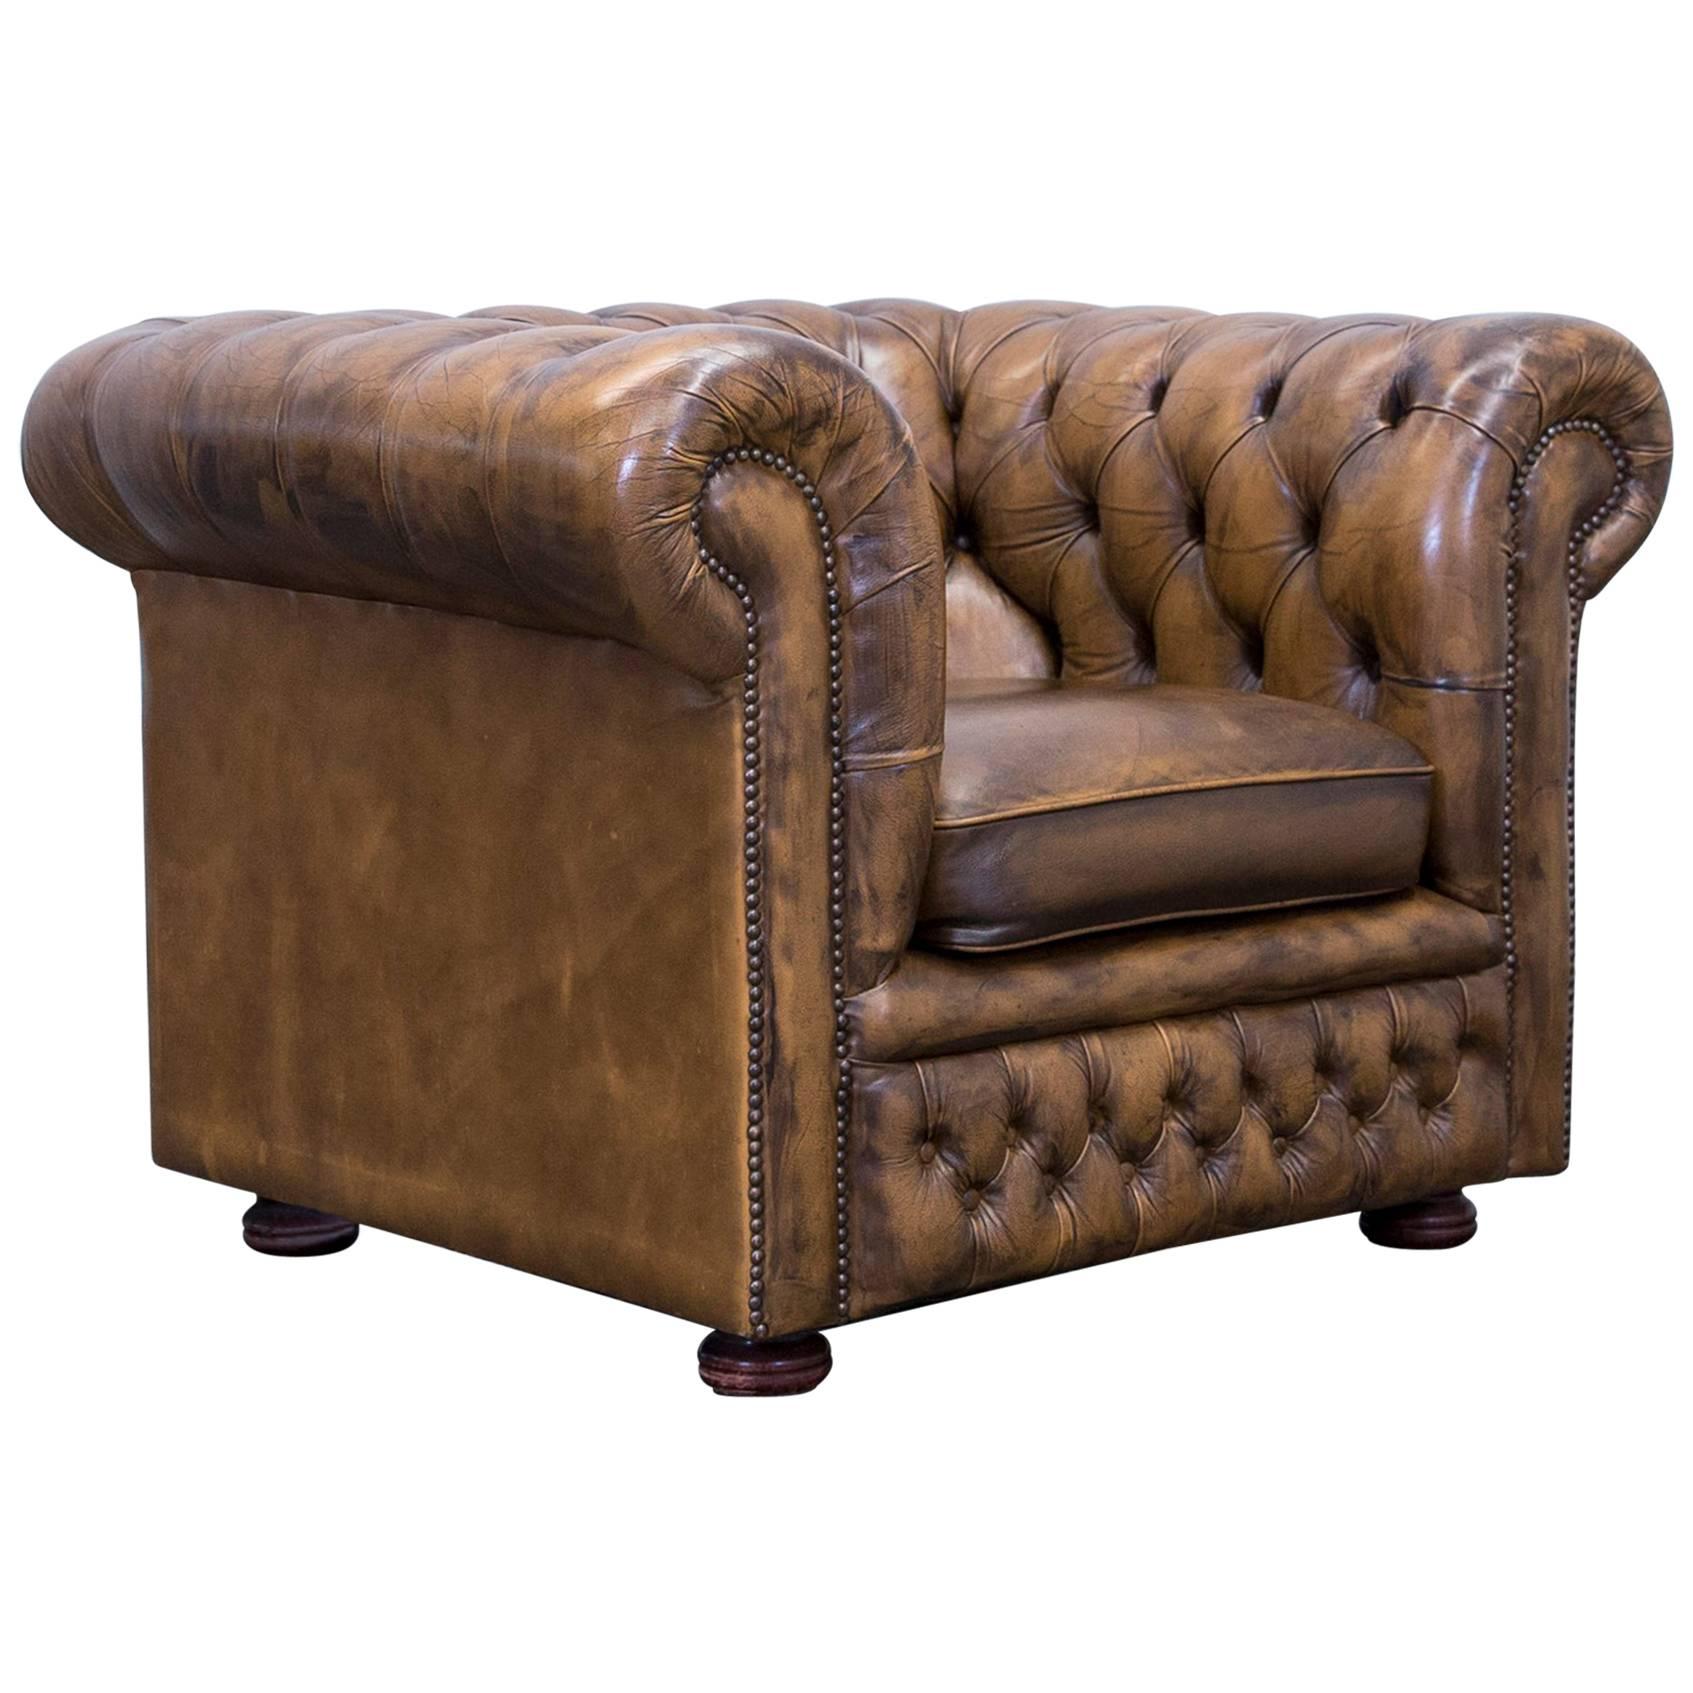 Chesterfield Clubchair Leather Brown Oneseater Couch Retro Vintage